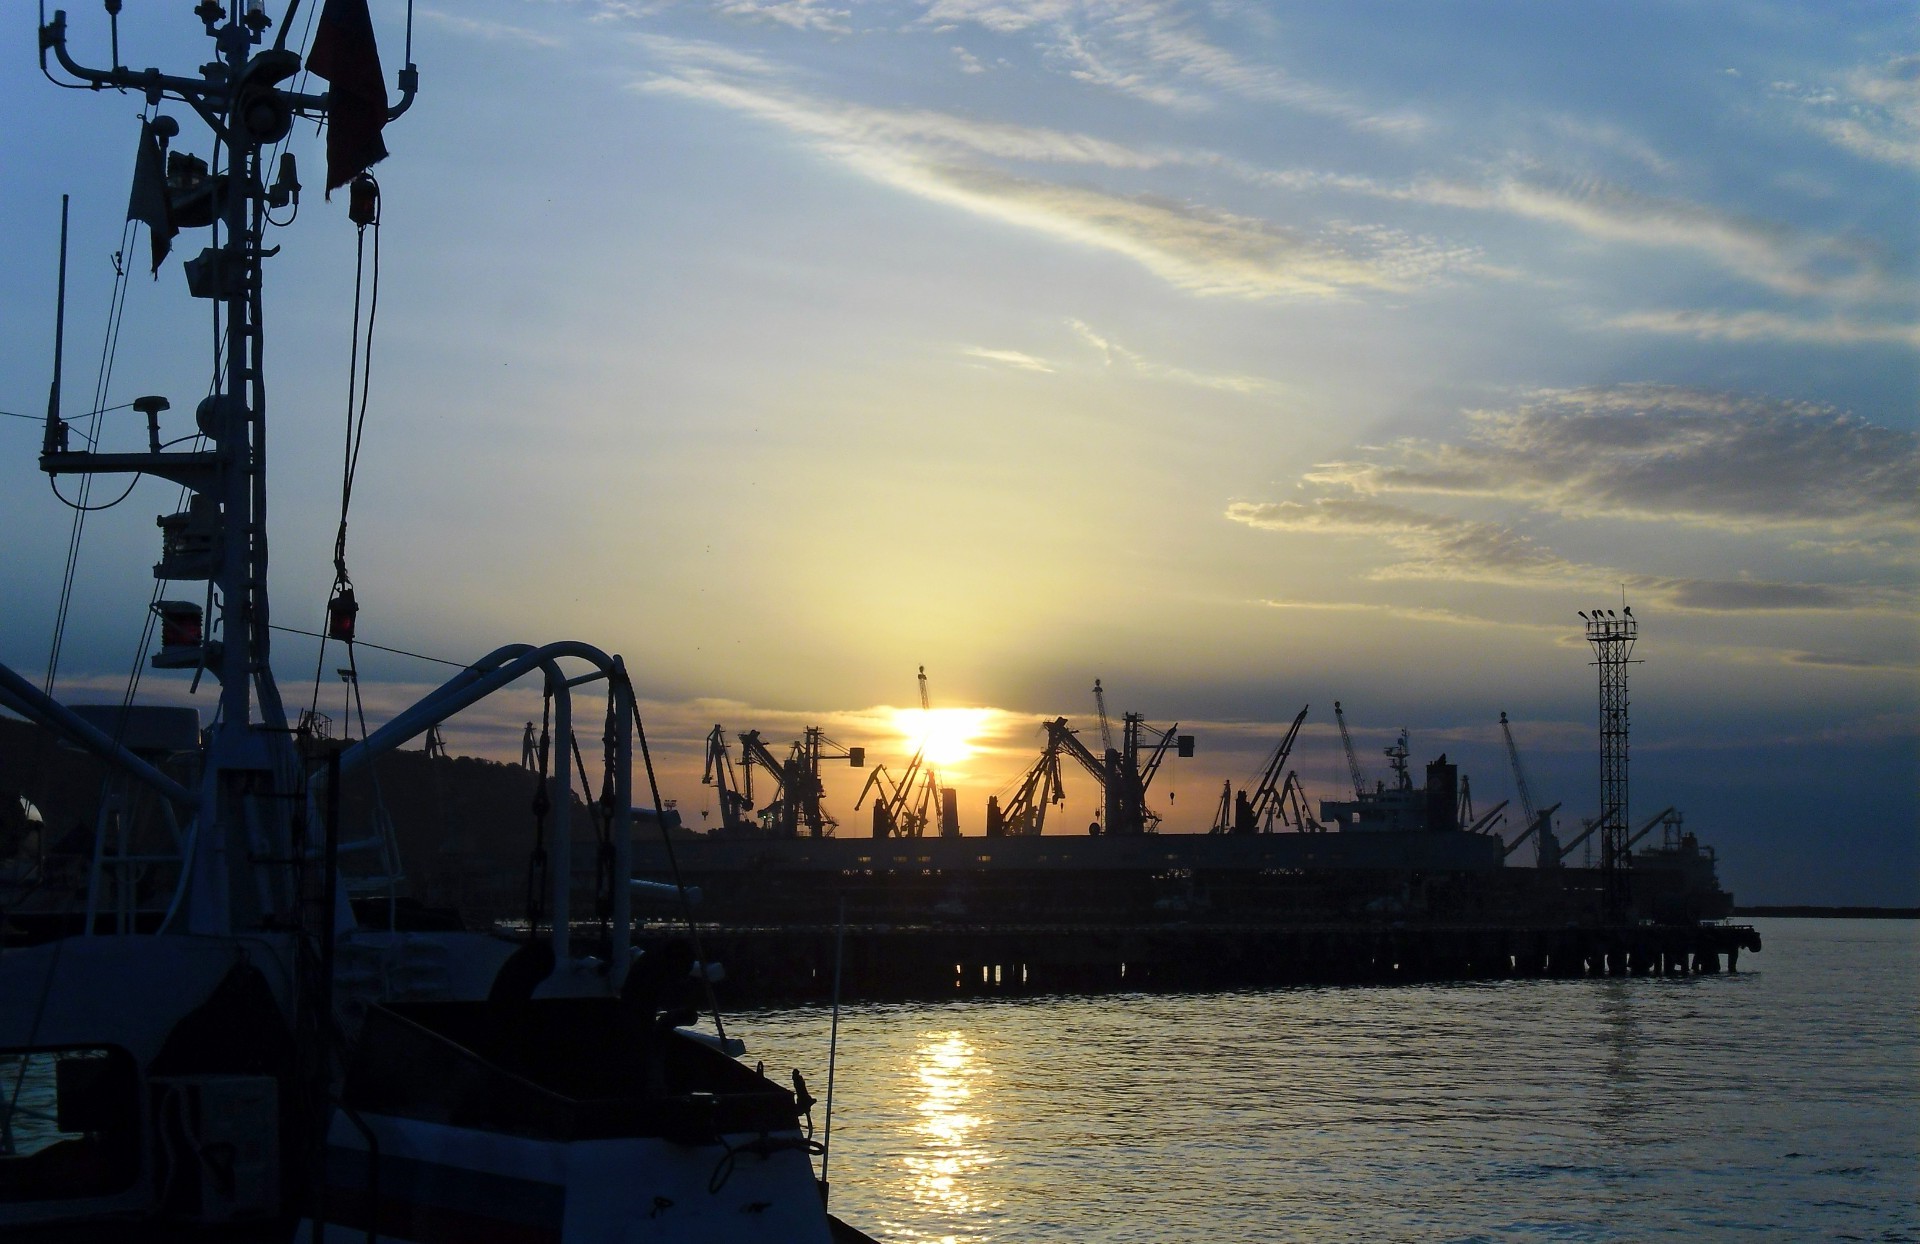 the sunset and sunrise watercraft water sunset sea pier ship industry boat harbor ocean transportation system dawn sky energy port silhouette evening vehicle